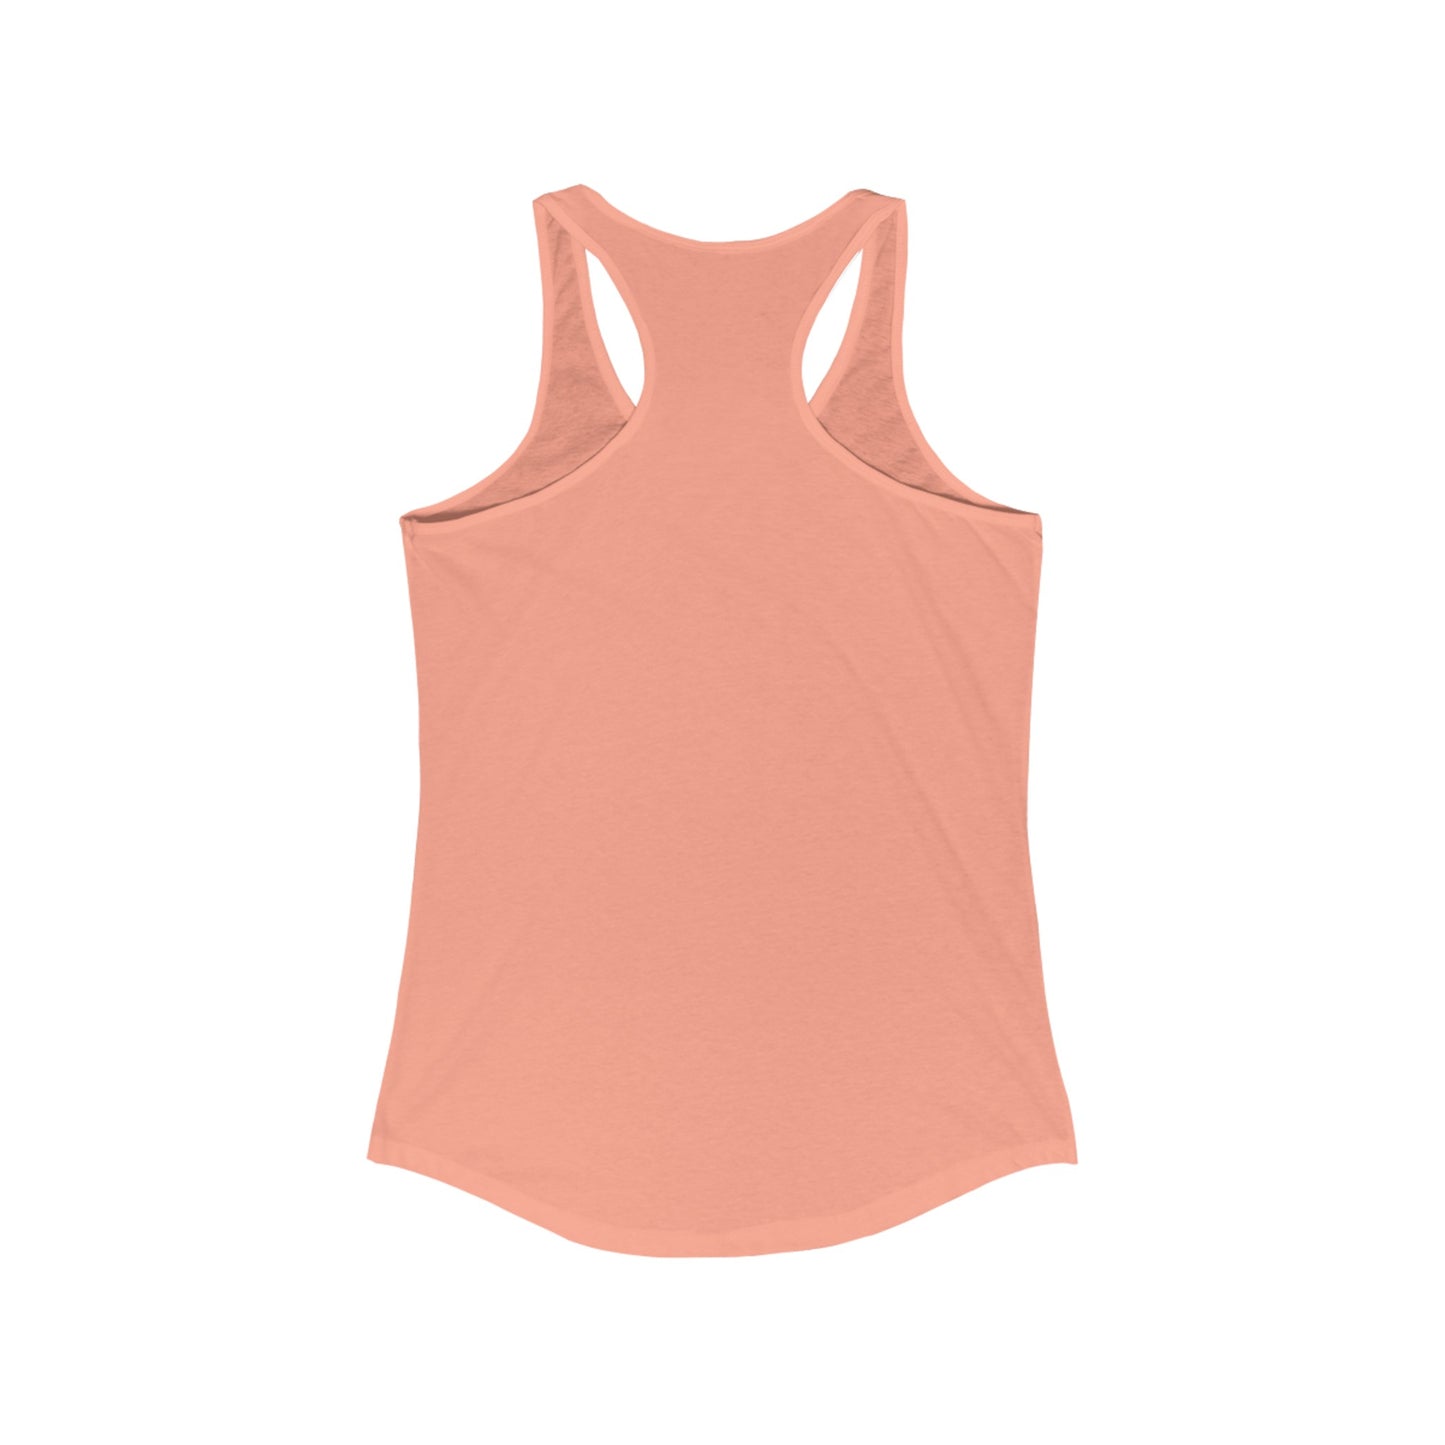 Sons of the Divide- Women's Ideal Racerback Tank